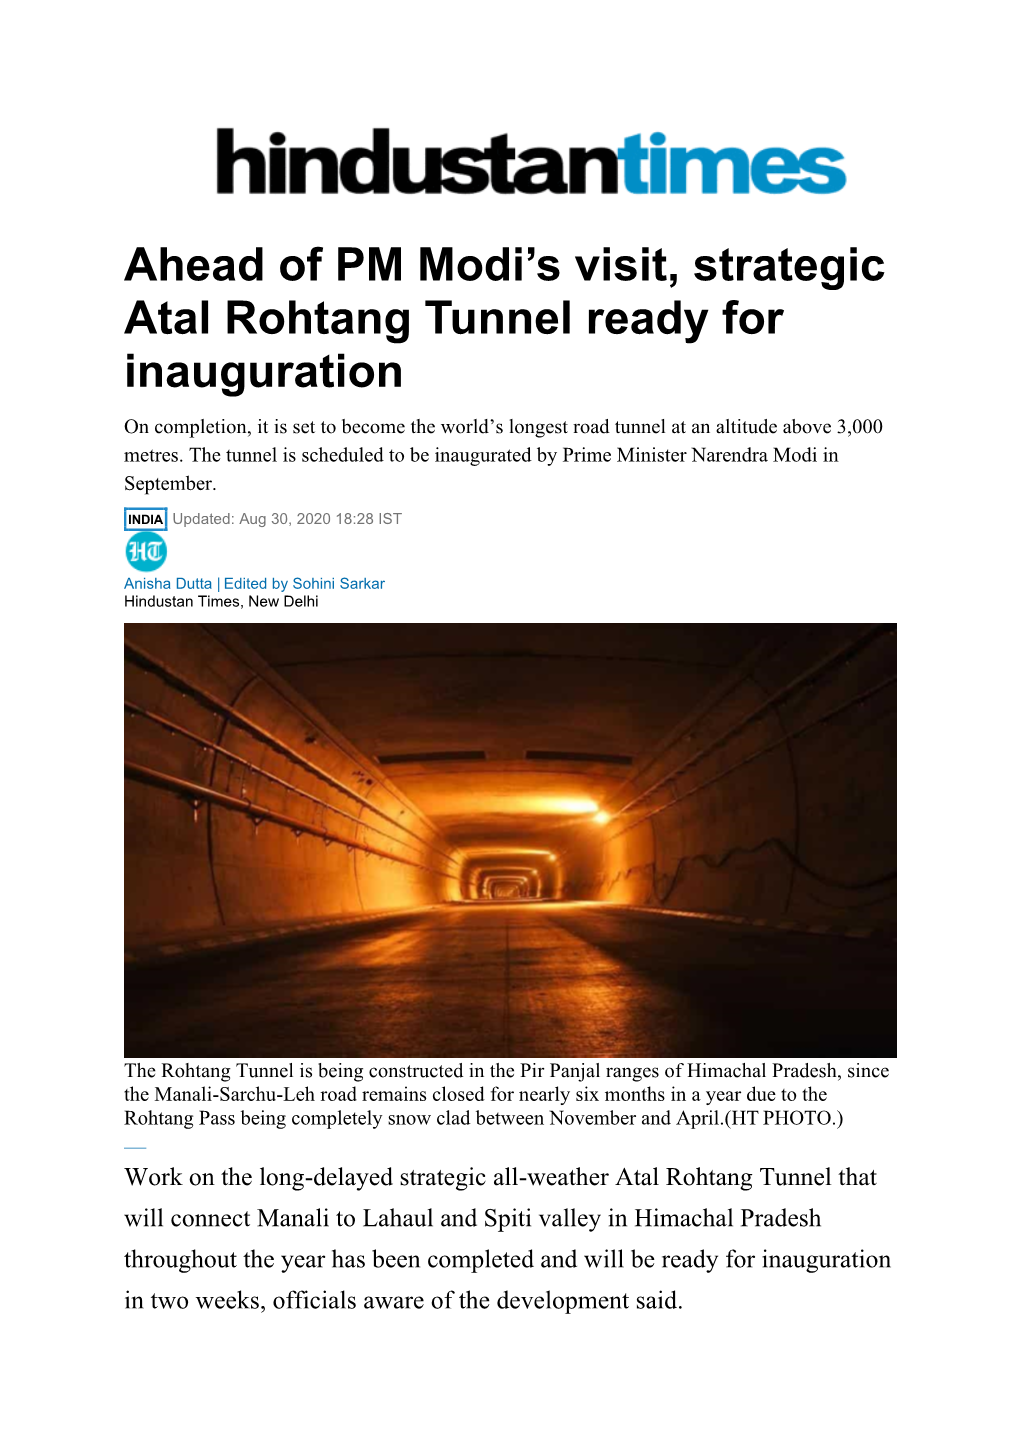 Ahead of PM Modi's Visit, Strategic Atal Rohtang Tunnel Ready for Inauguration